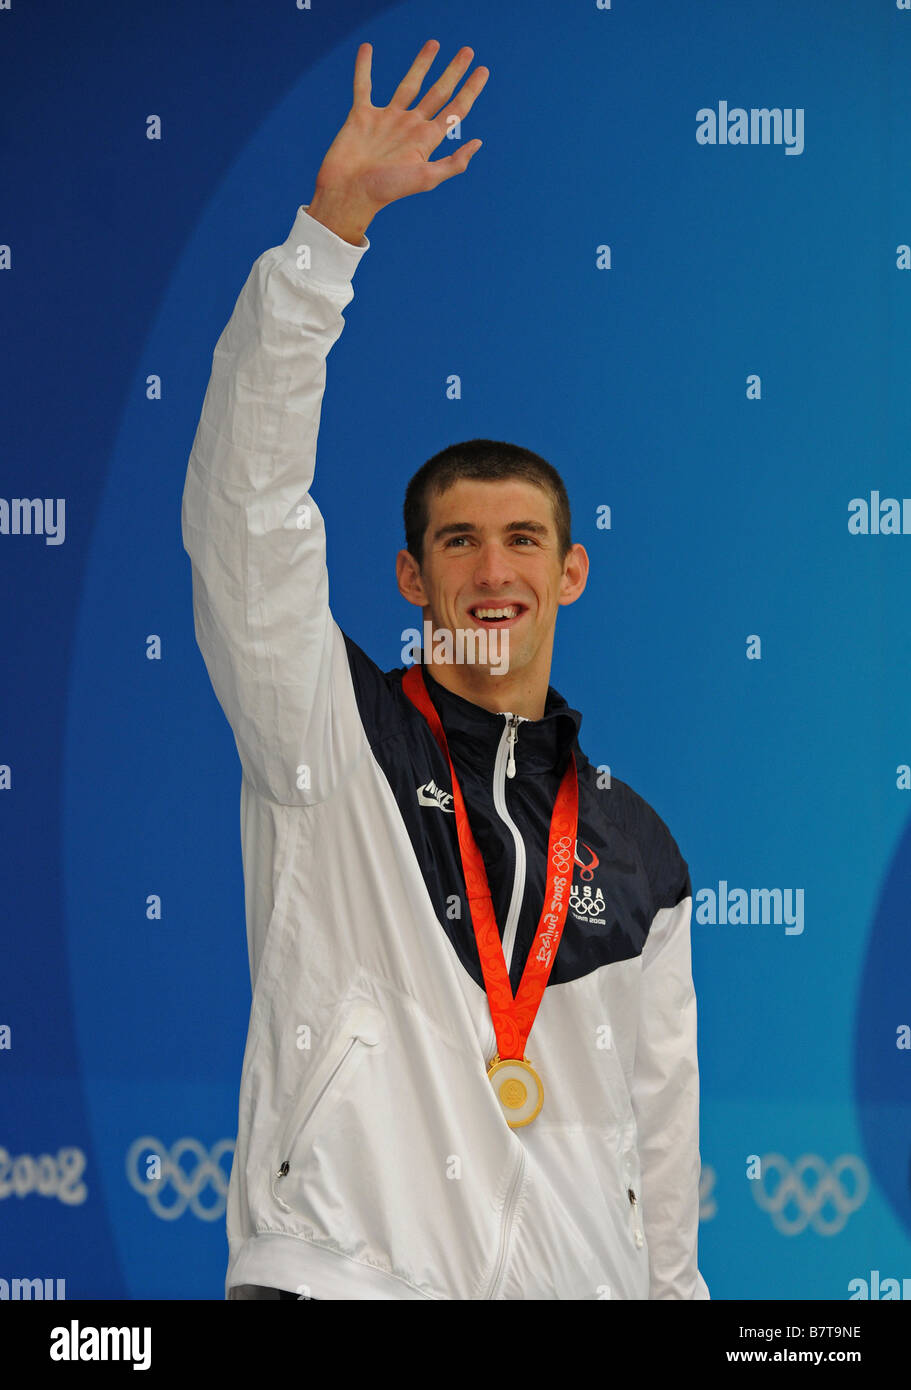 Michael Phelps waves to the public after receiving one of his eight gold medals at the Beijing Olympic Games Stock Photo